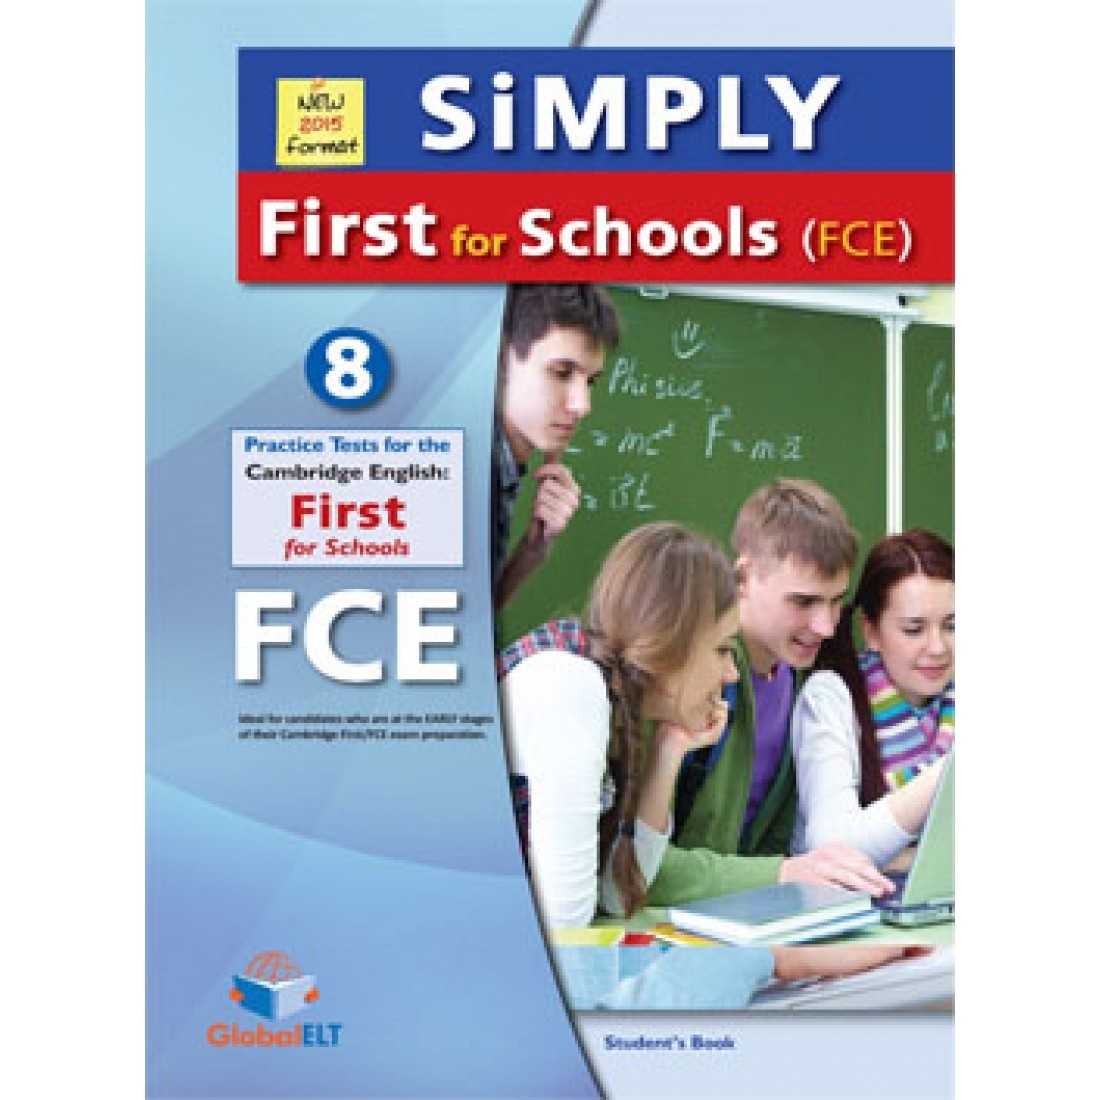 Simply b2 fce for schools attendis pack